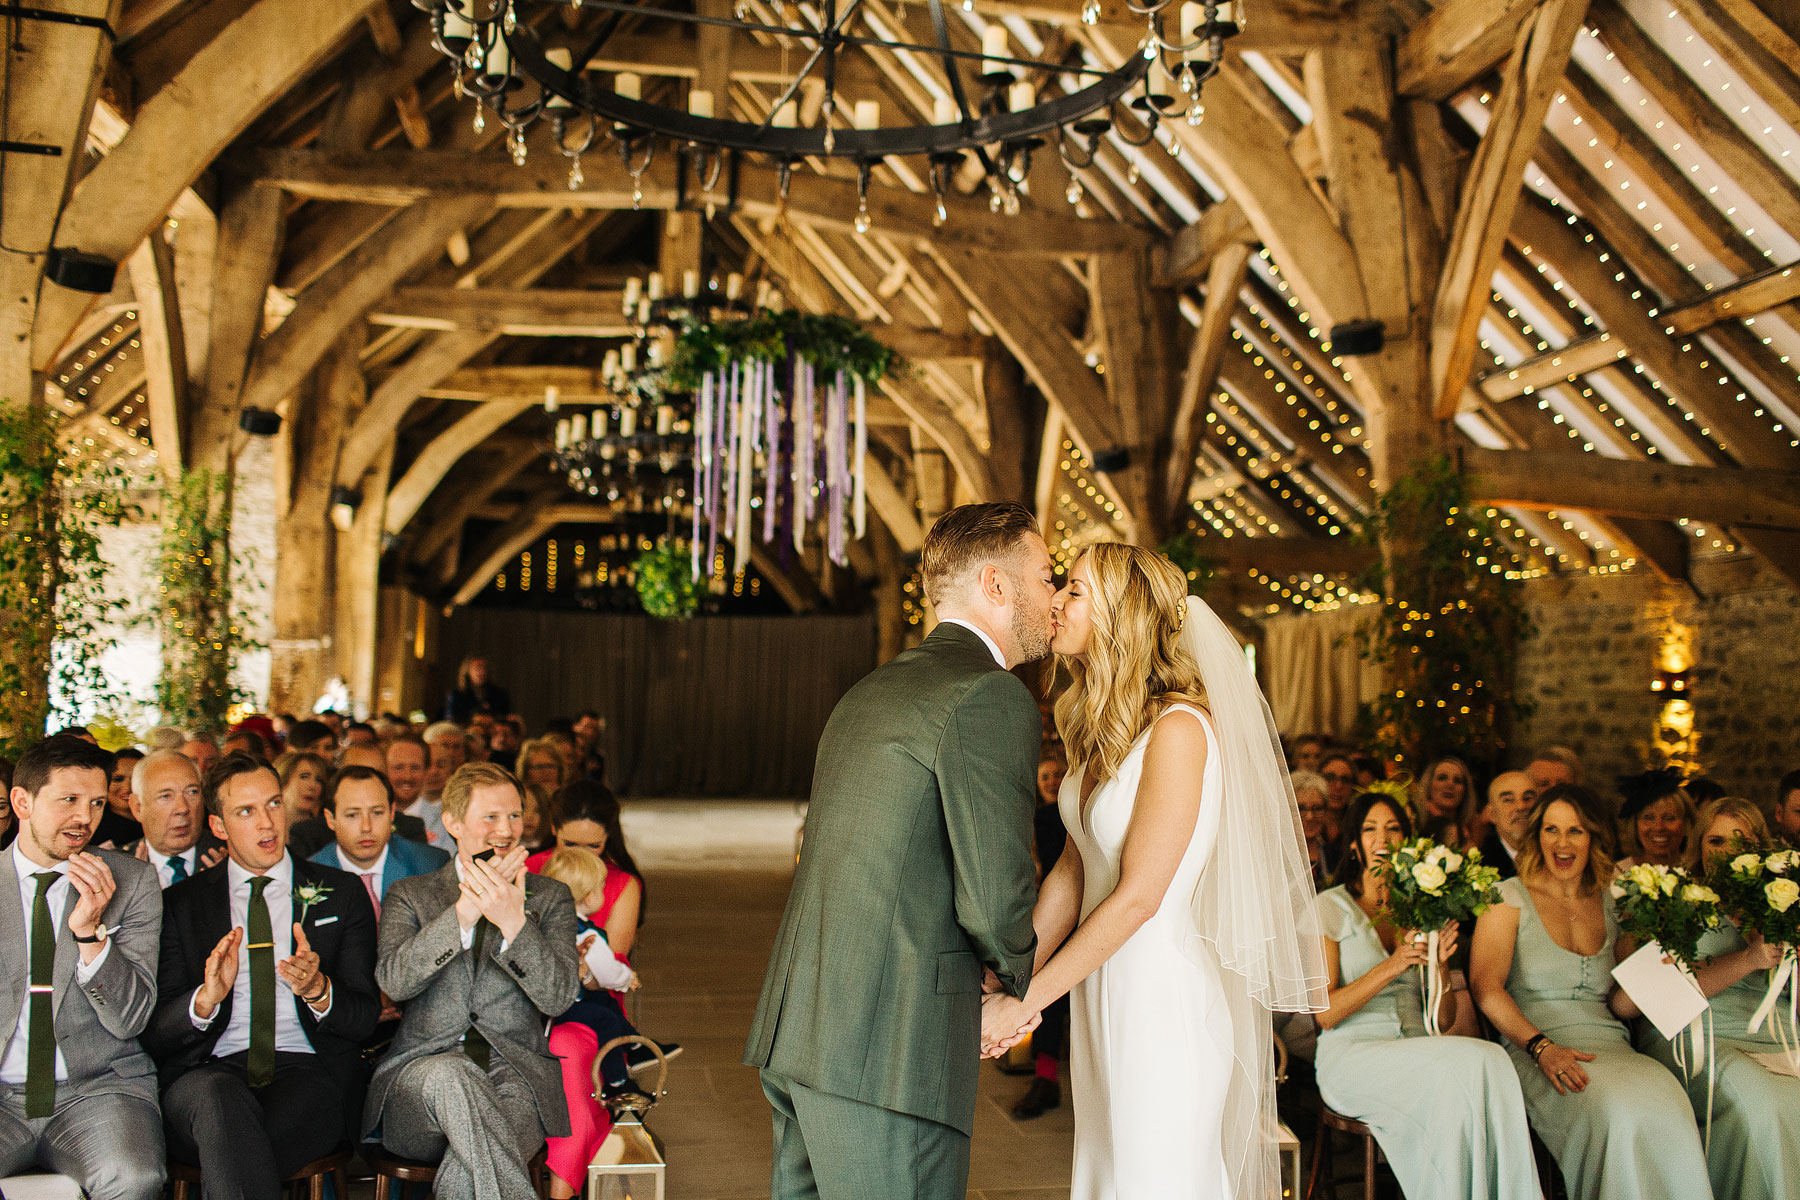 fun and natural wedding photos in north yorkshire